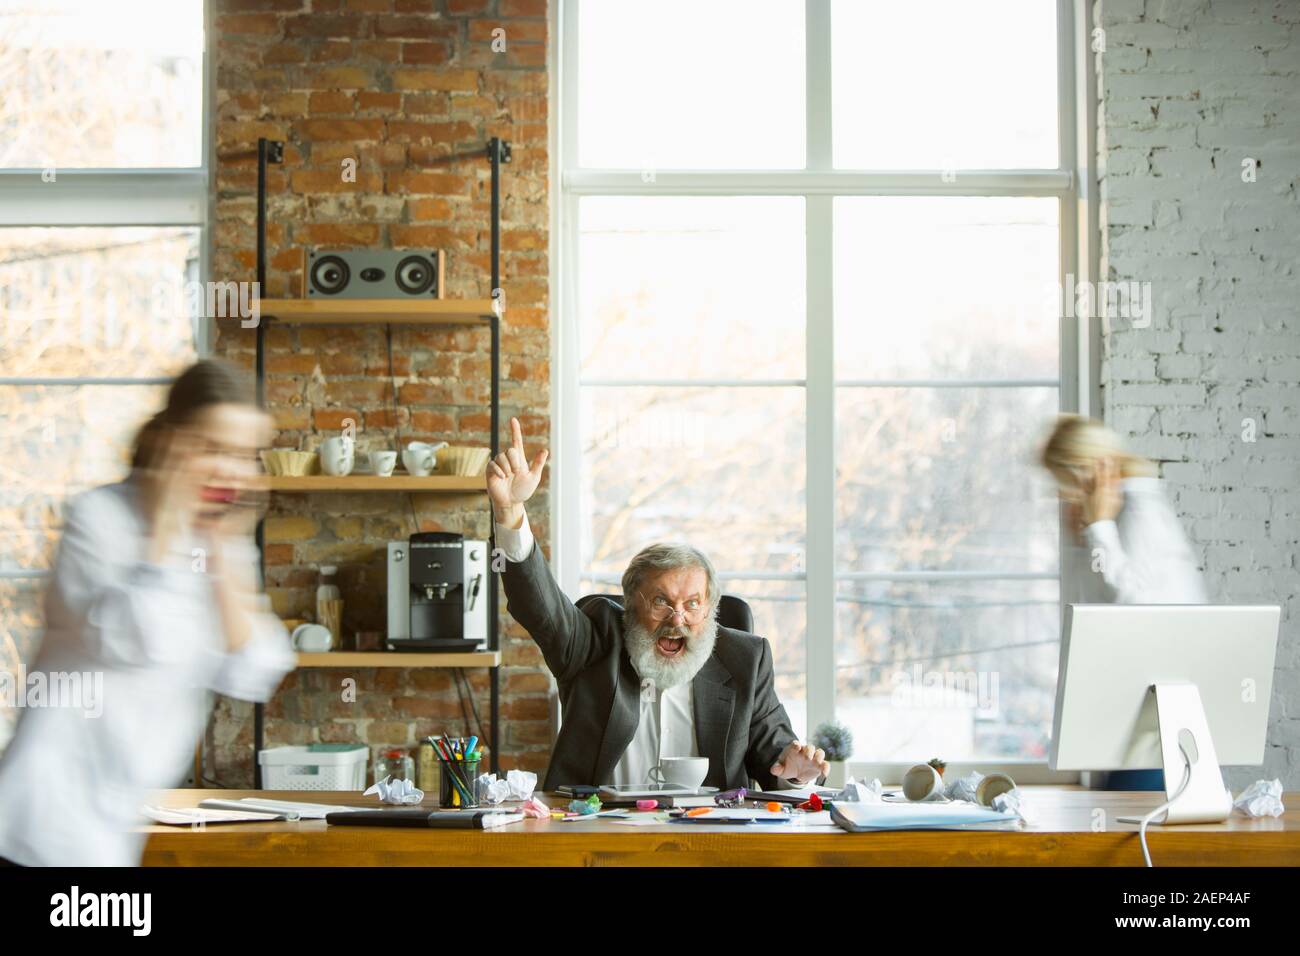 Tired boss resting at his workplace while busy people moving near blurred. Office worker, manager working, drinking coffee and giving directions for his colleagues. Business, work, workload concept. Stock Photo